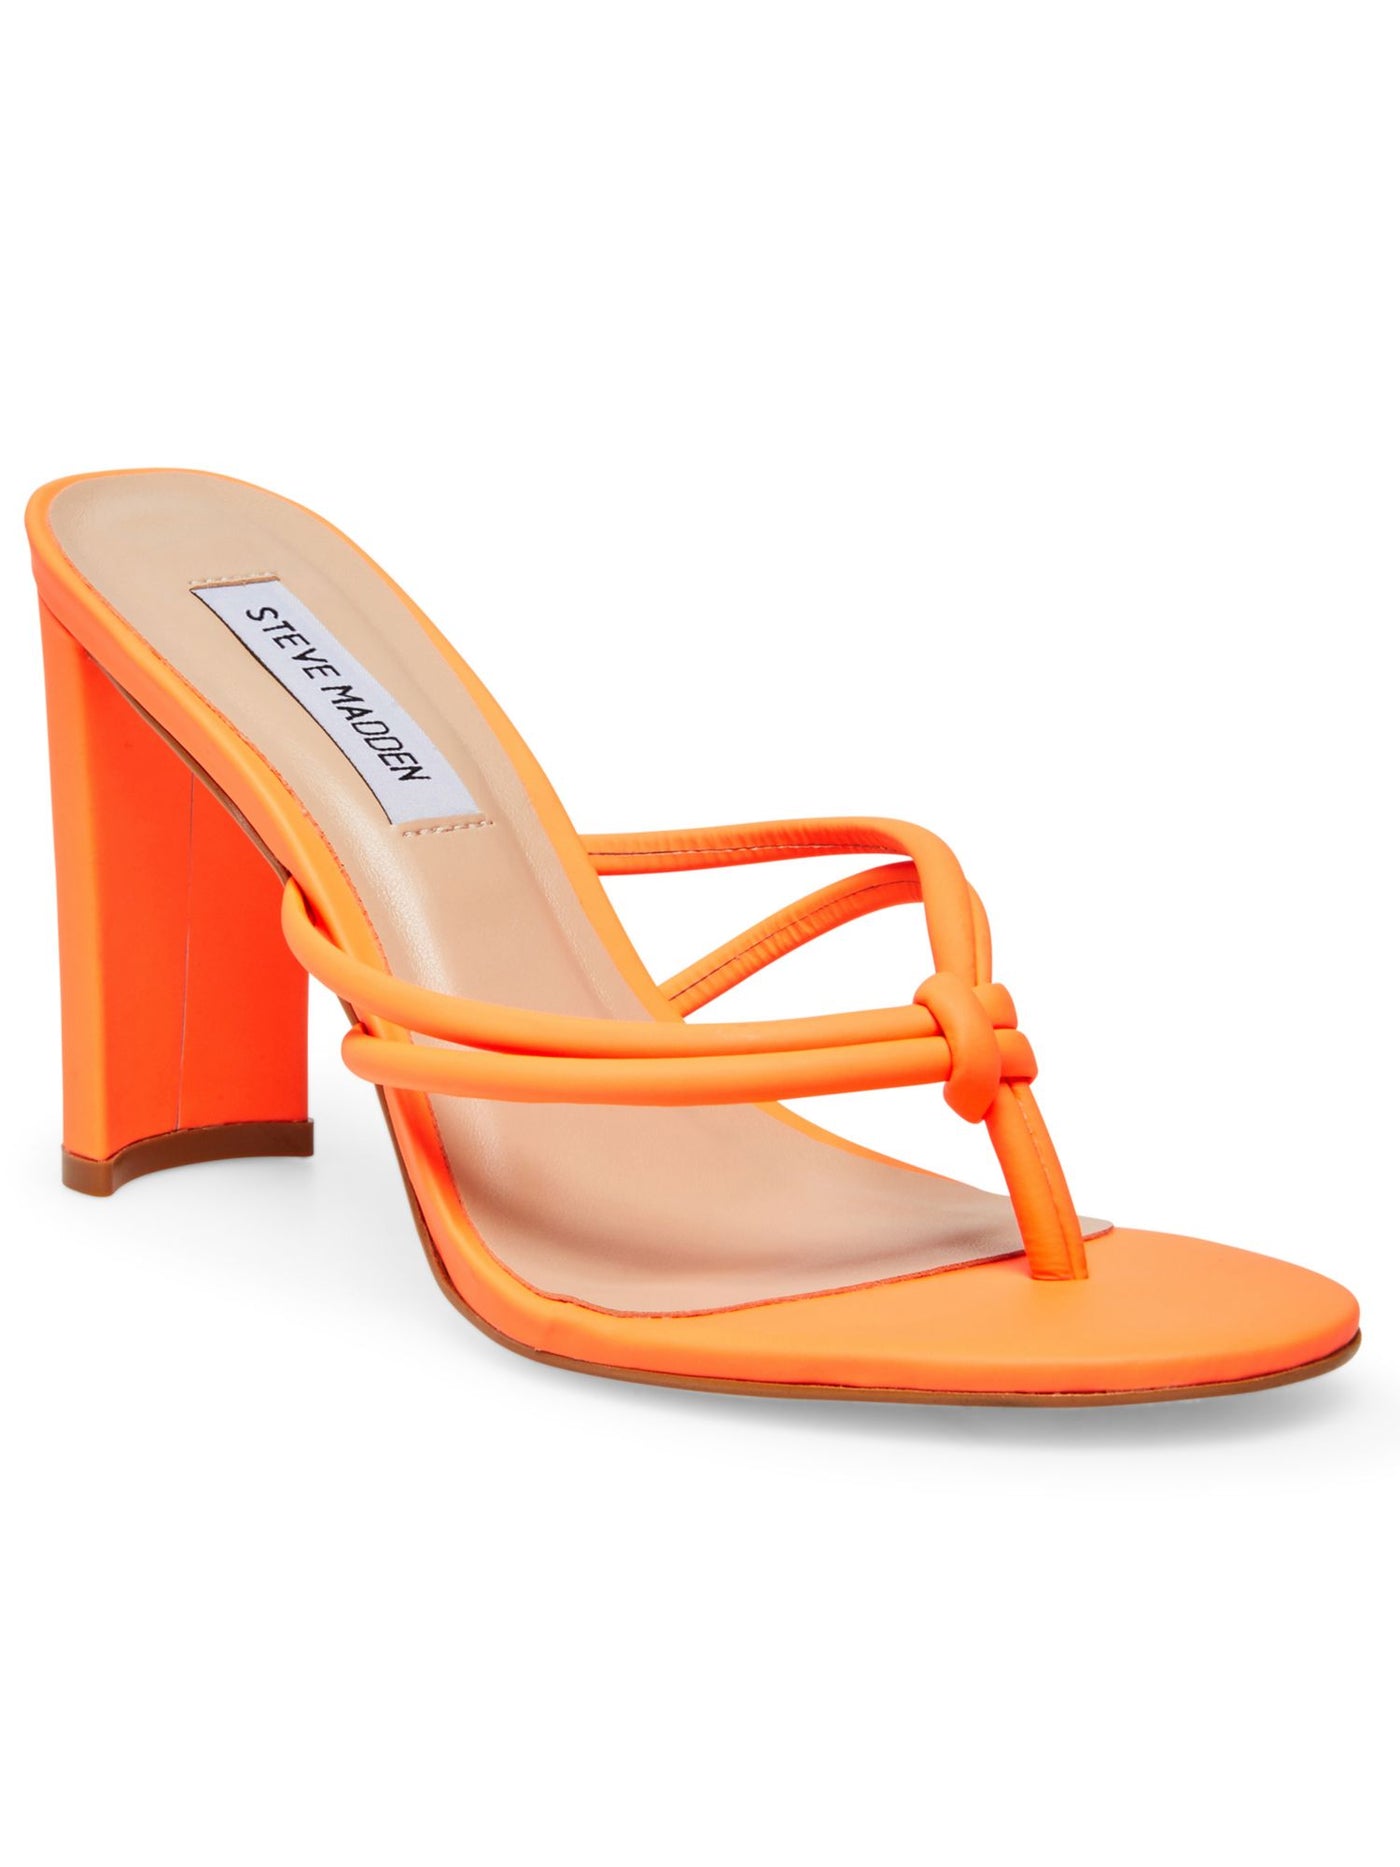 STEVE MADDEN Womens Orange Neon Strappy Padded Unreal Round Toe Sculpted Heel Slip On Leather Heeled Thong Sandals 8 M